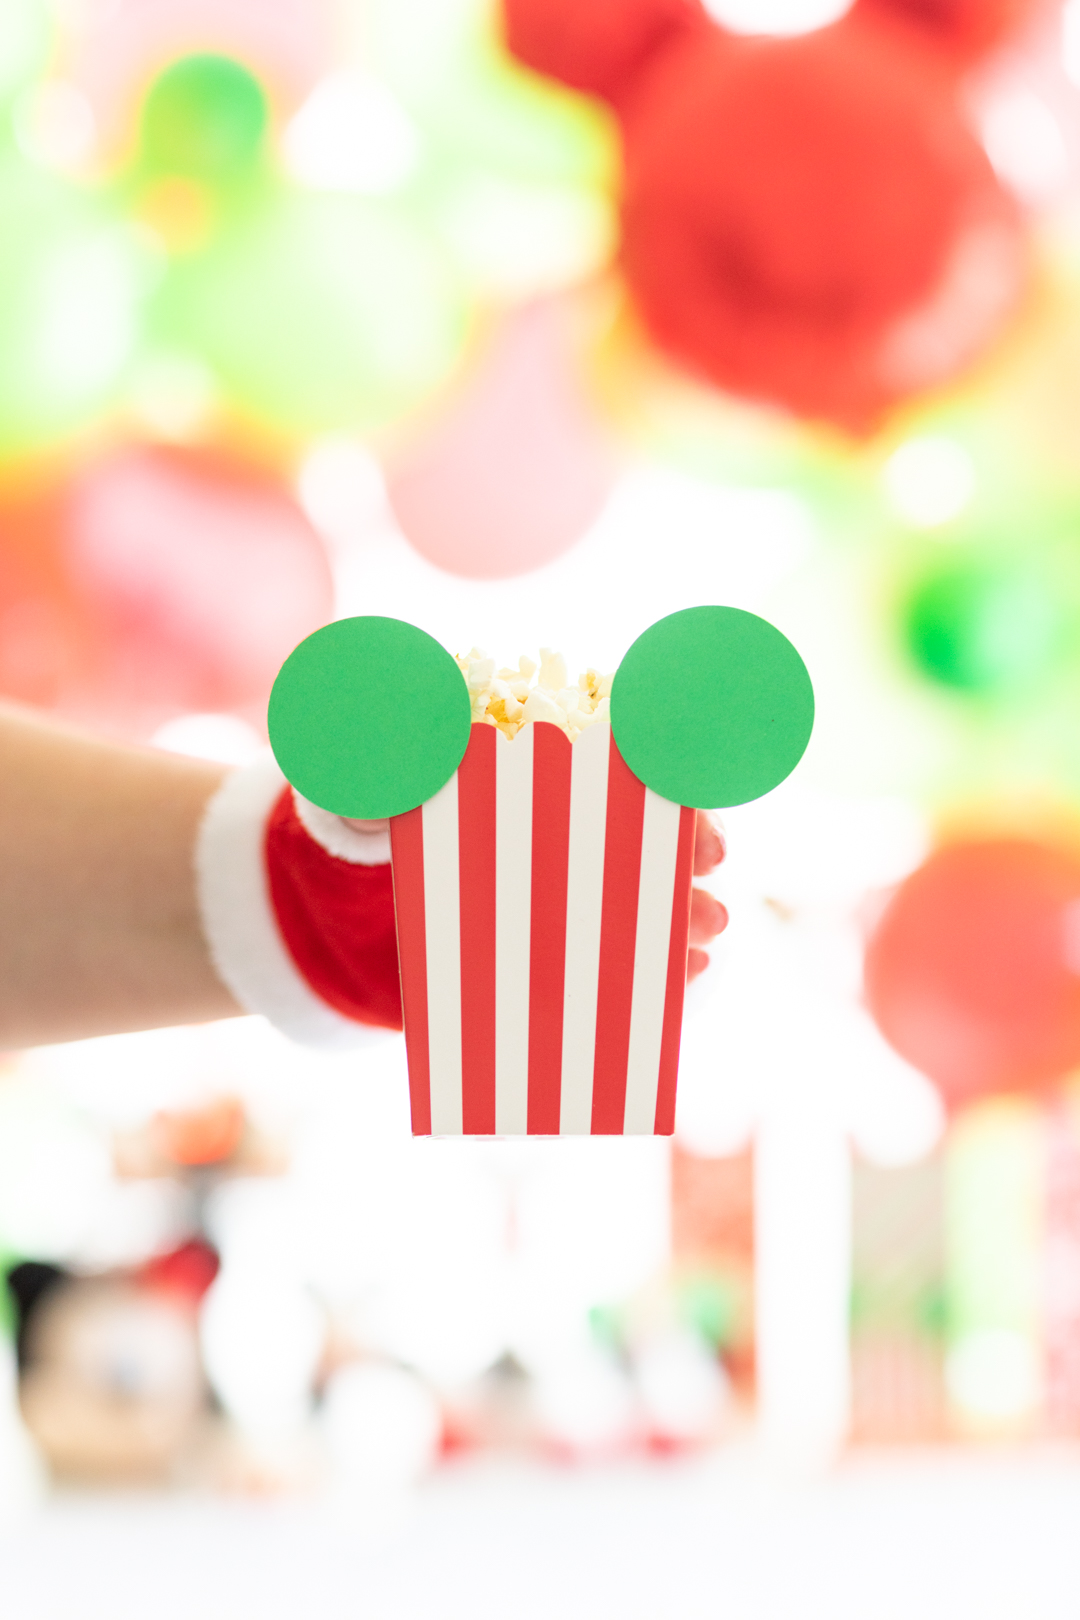 mickey mouse popcorn box . red and white popcorn box with green cut out mickey mouse ears and filled with popcorn